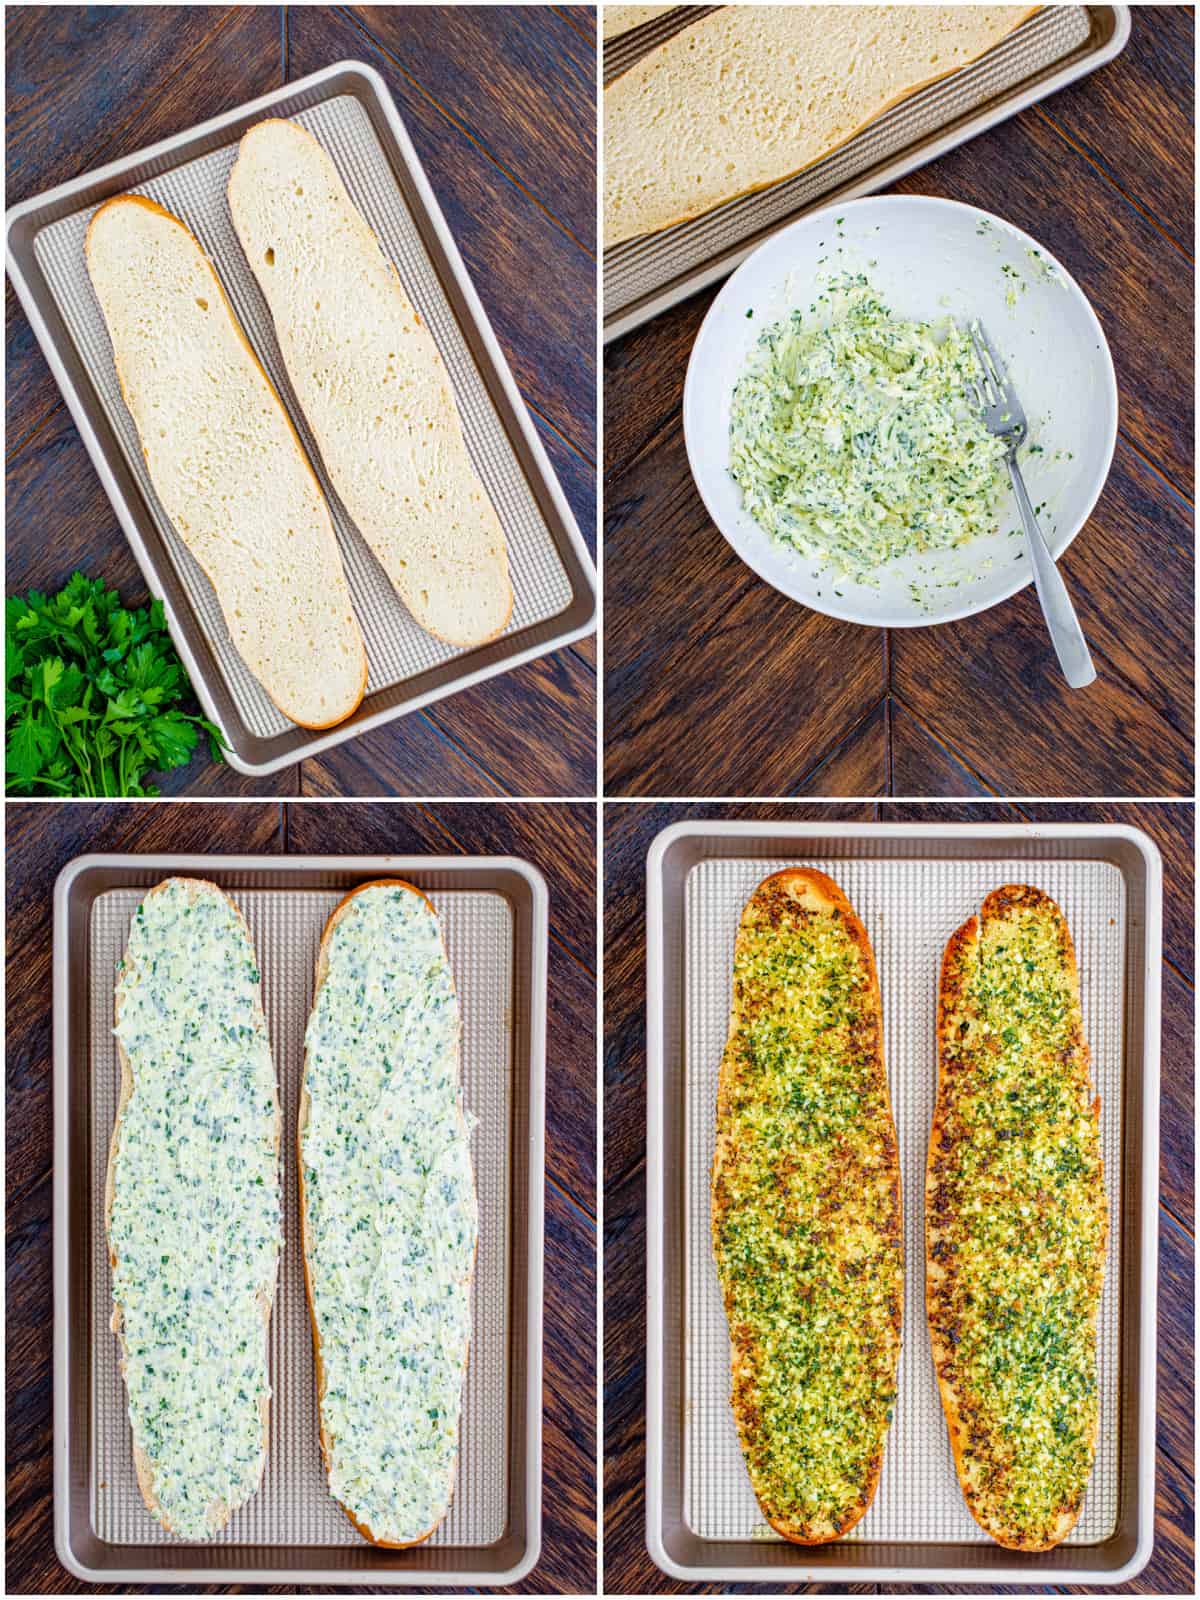 Step by step photos on how to make an Easy Garlic Bread Recipe.